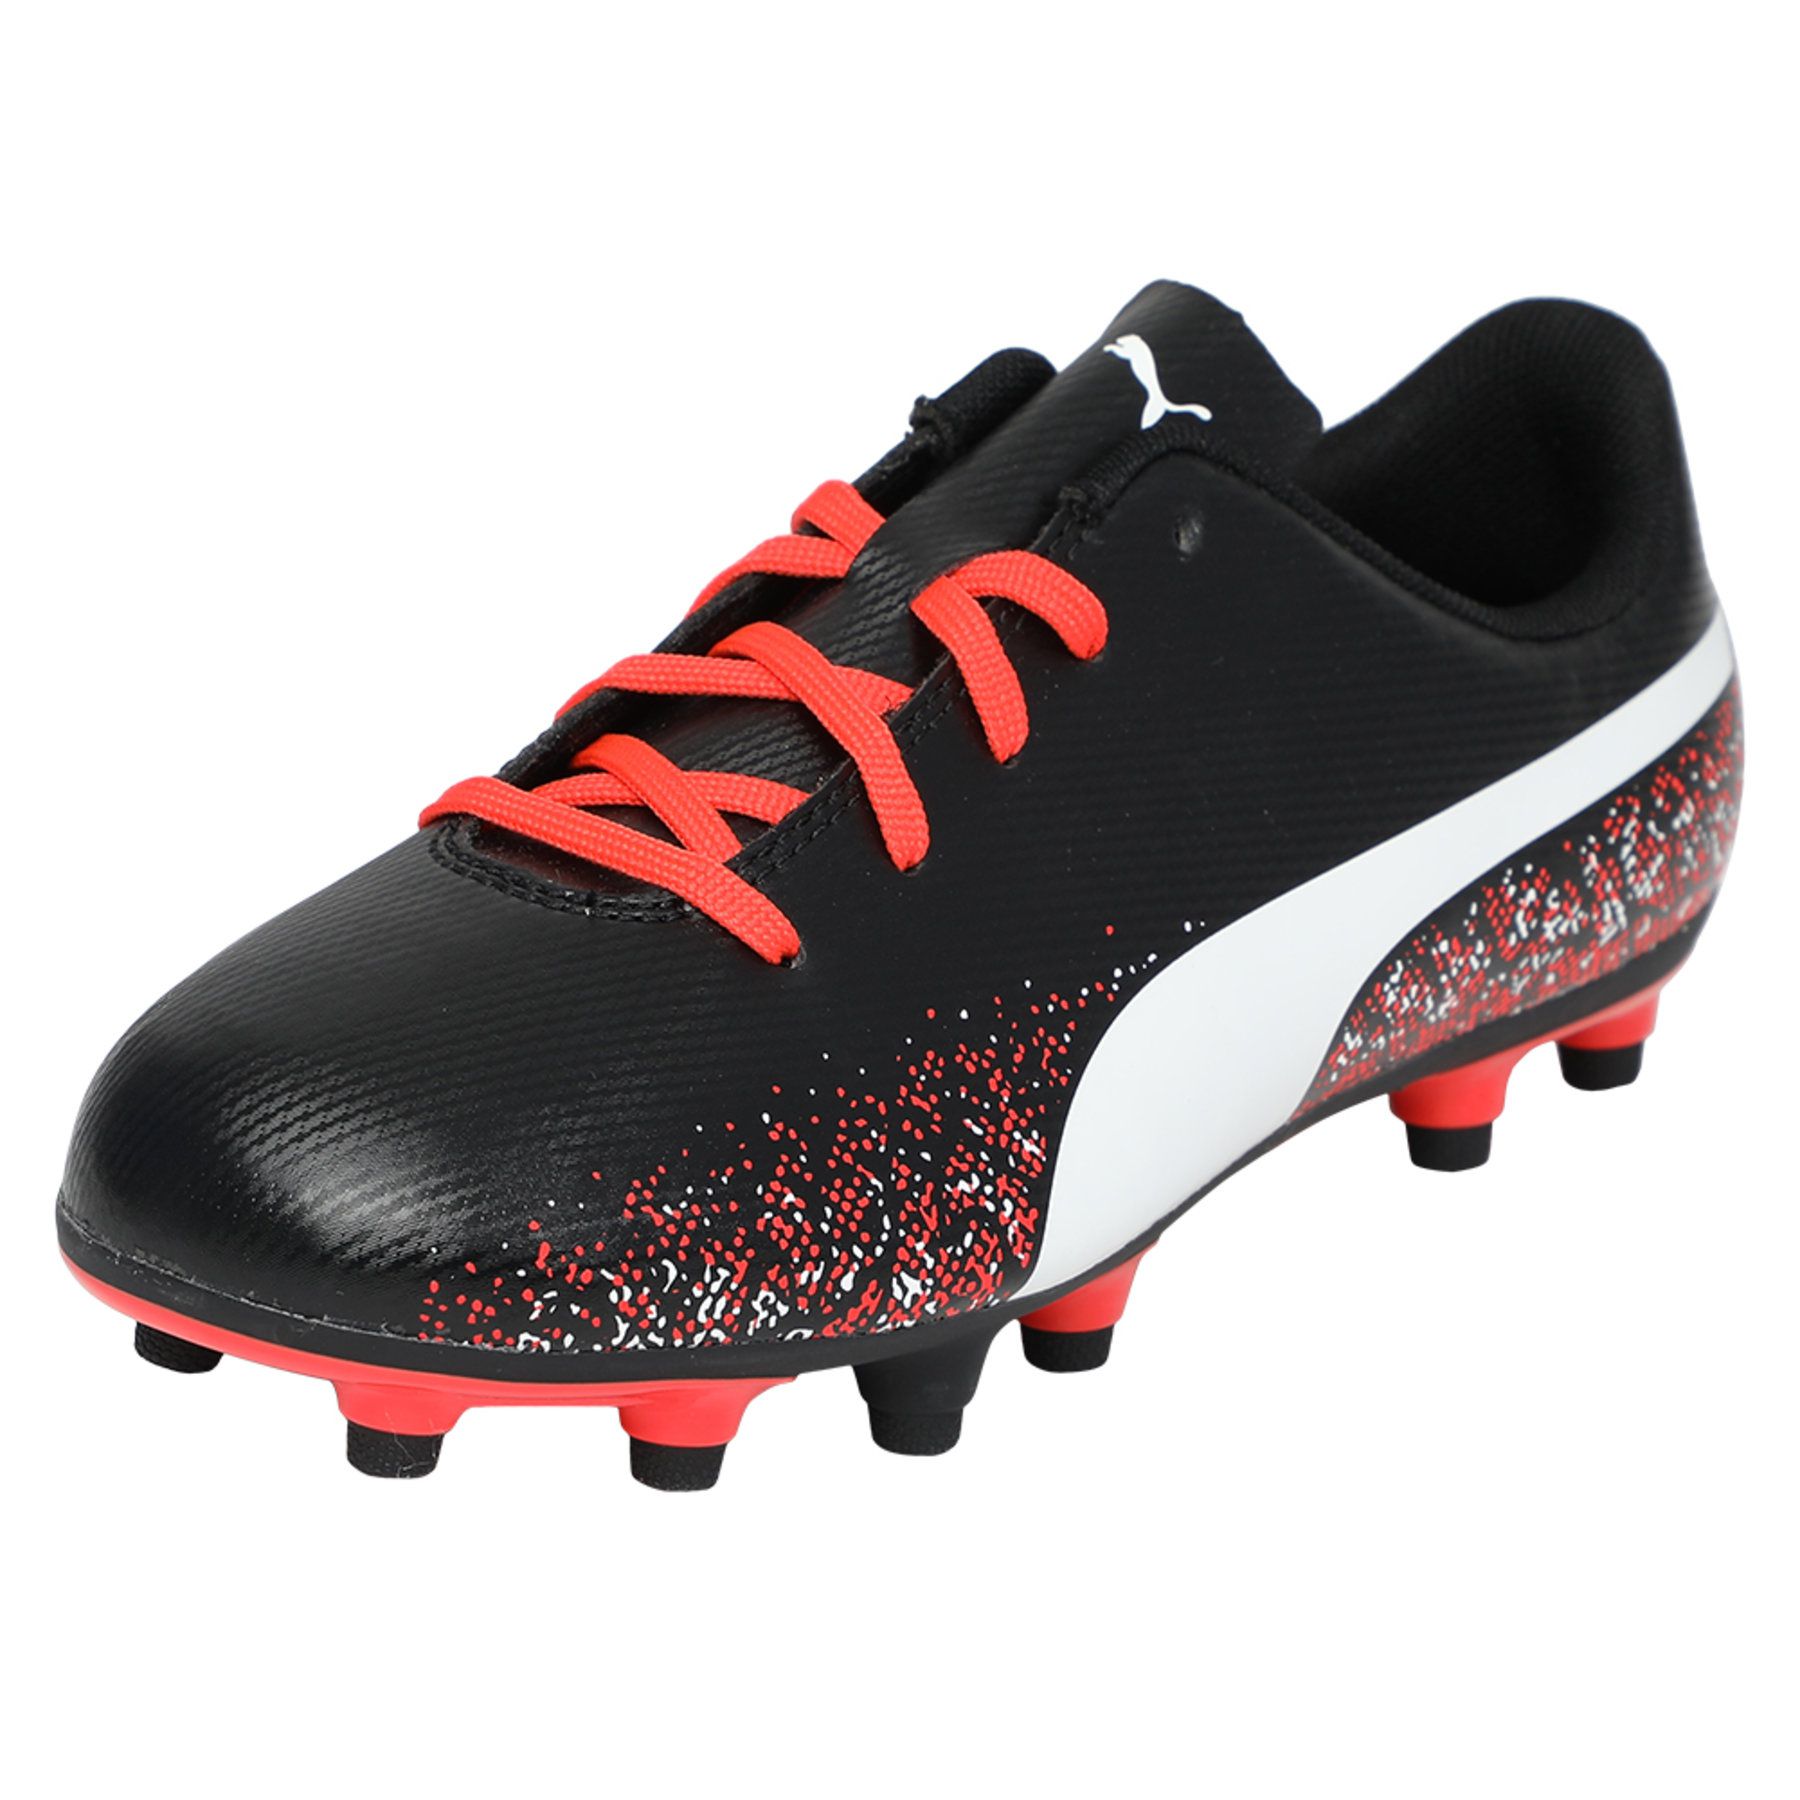 Puma Truora Fg Jr Black Football Shoes - Buy Puma Truora Fg Jr Black  Football Shoes Online at Best Prices in India on Snapdeal